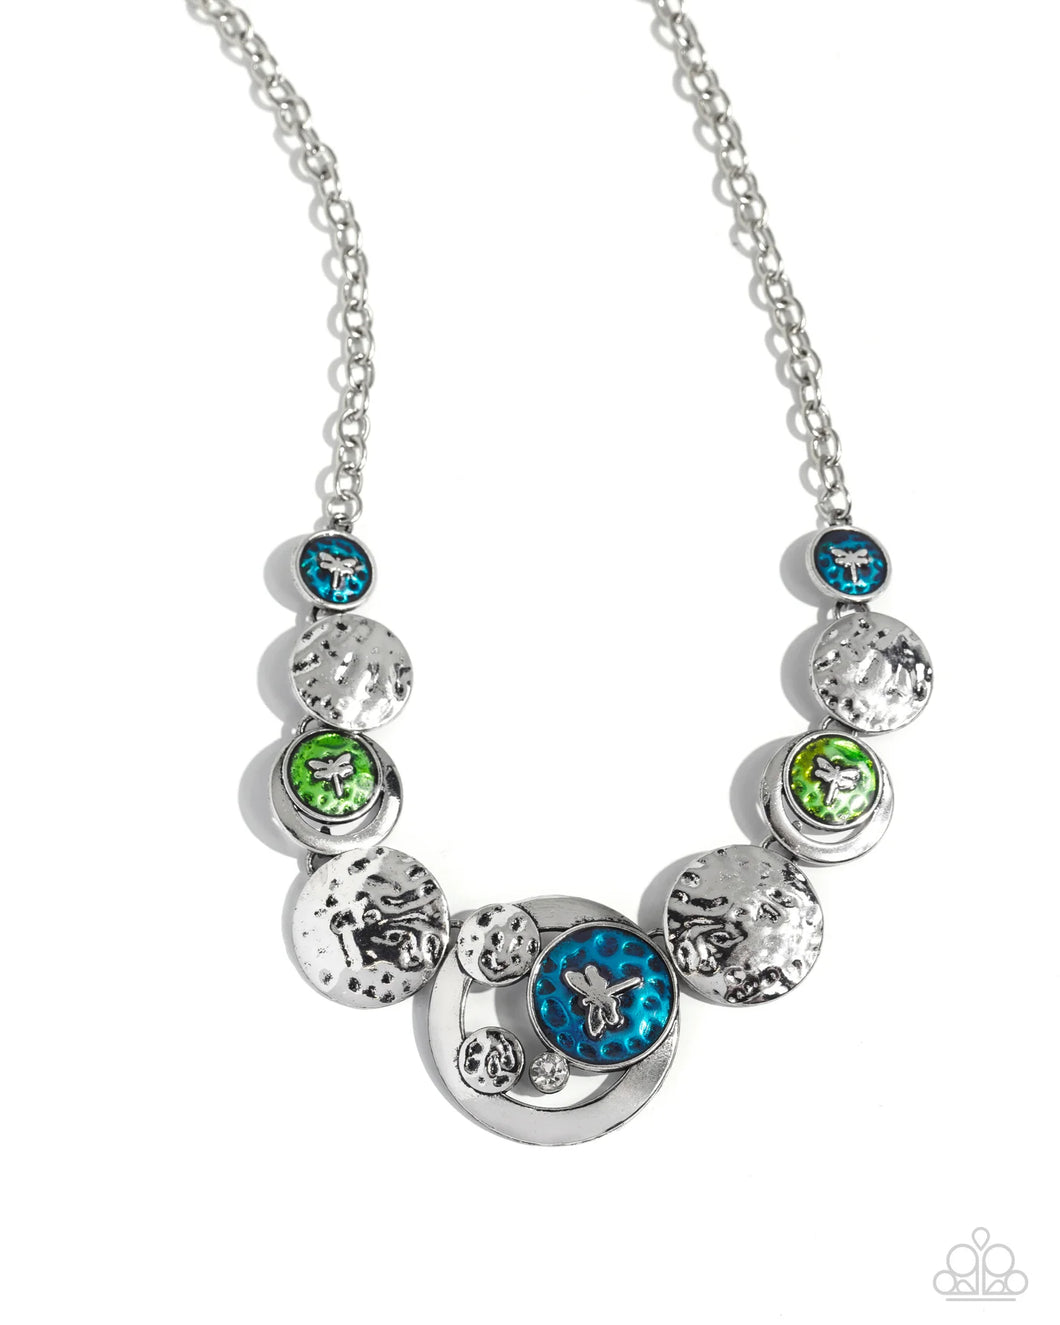 Dragonfly Design - Multi Necklace